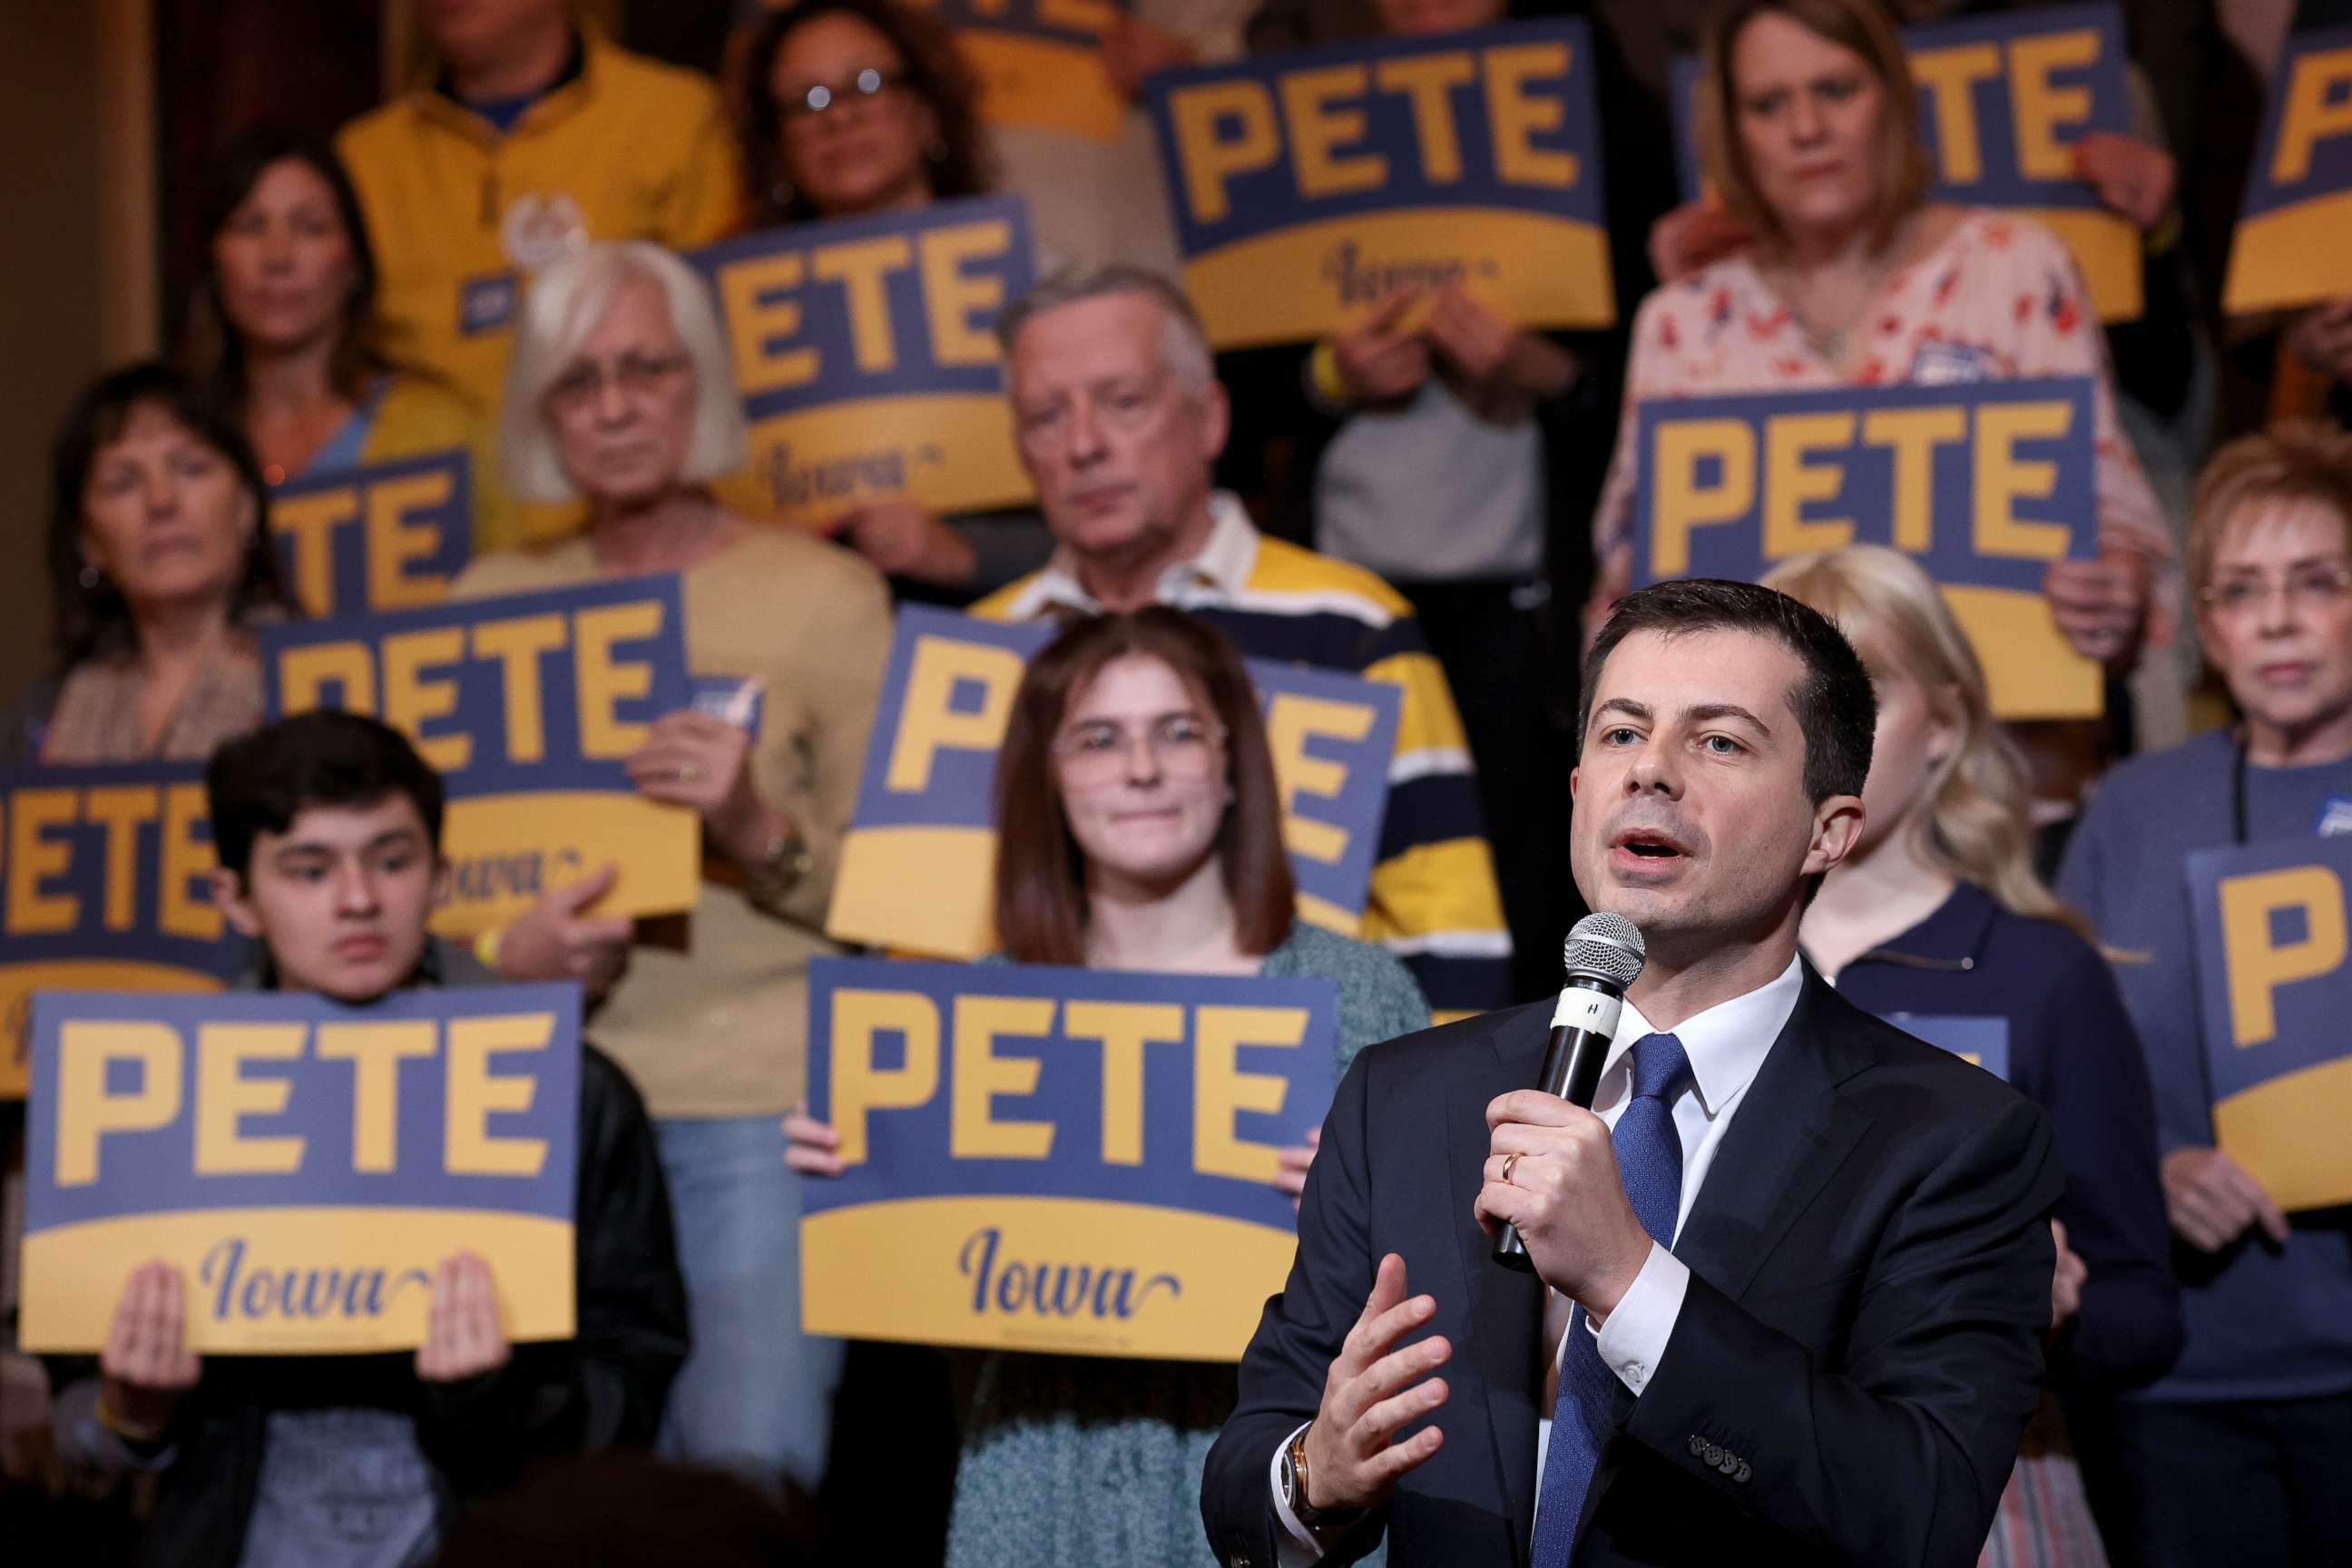 PHOTO: Democratic presidential candidate Pete Buttigieg speaks at a Meet the Candidate campaign event, Jan. 31, 2020, in Sioux City, Iowa.